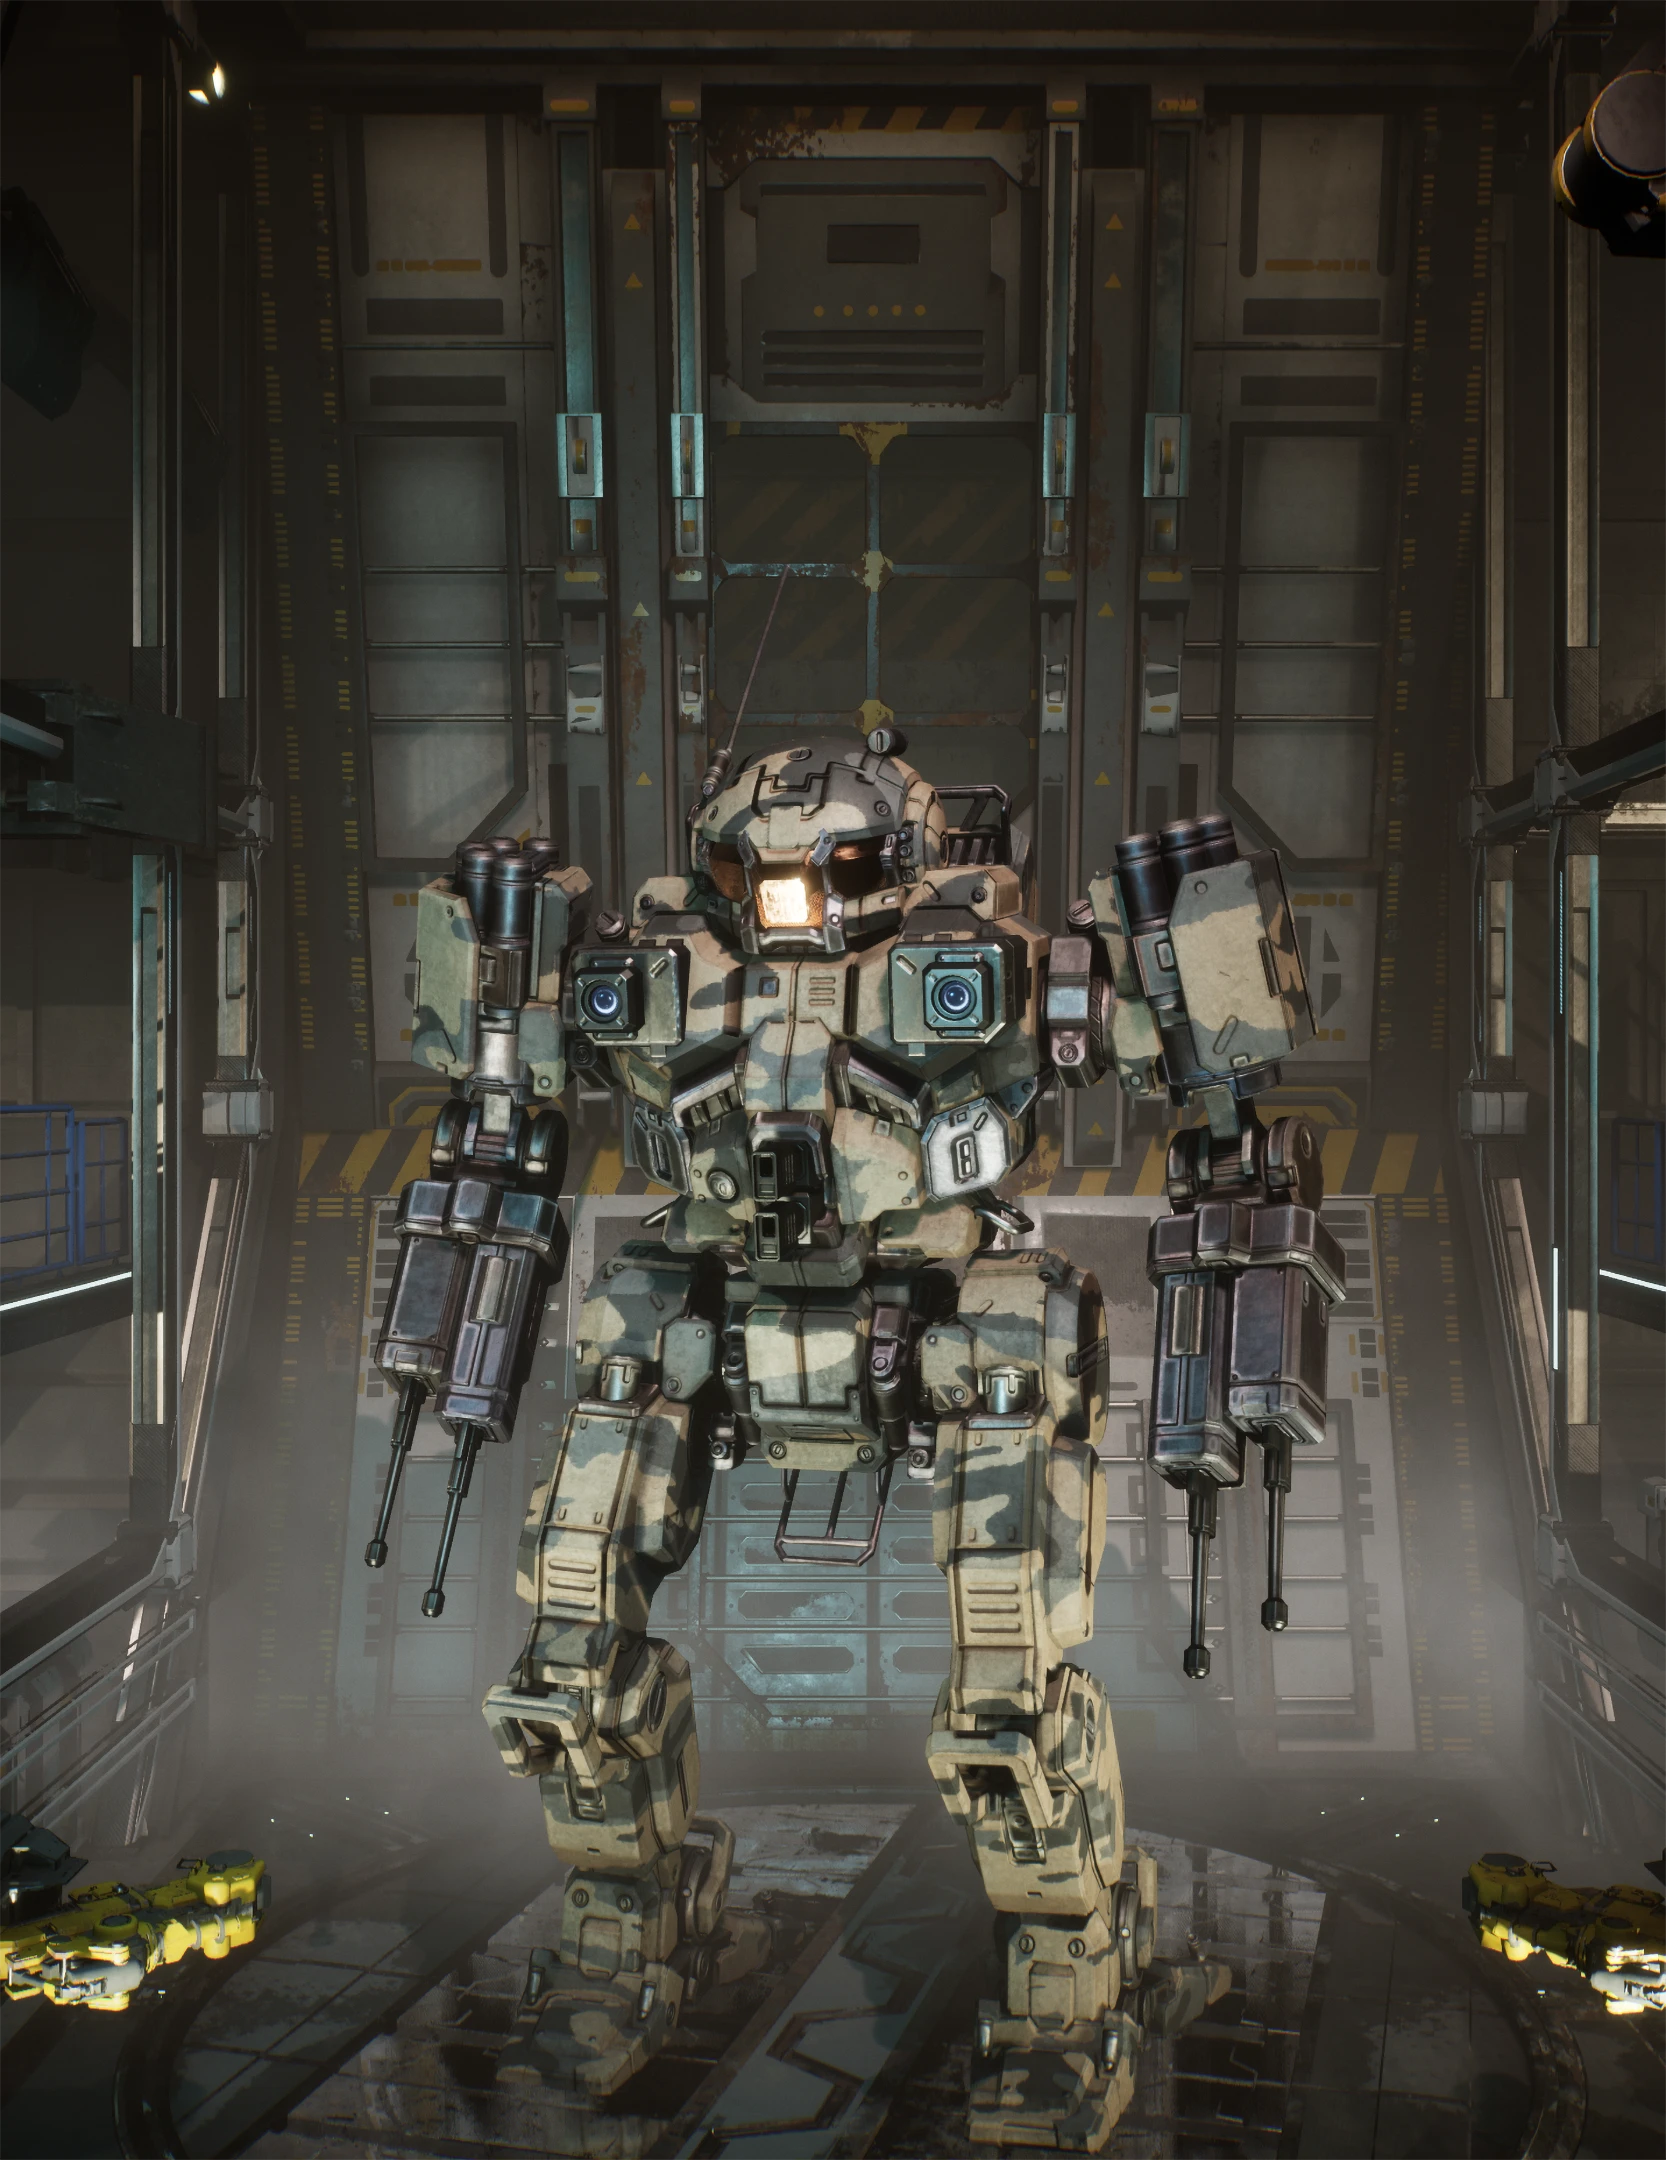 Mods at Titanfall 2 Nexus - Mods and Community